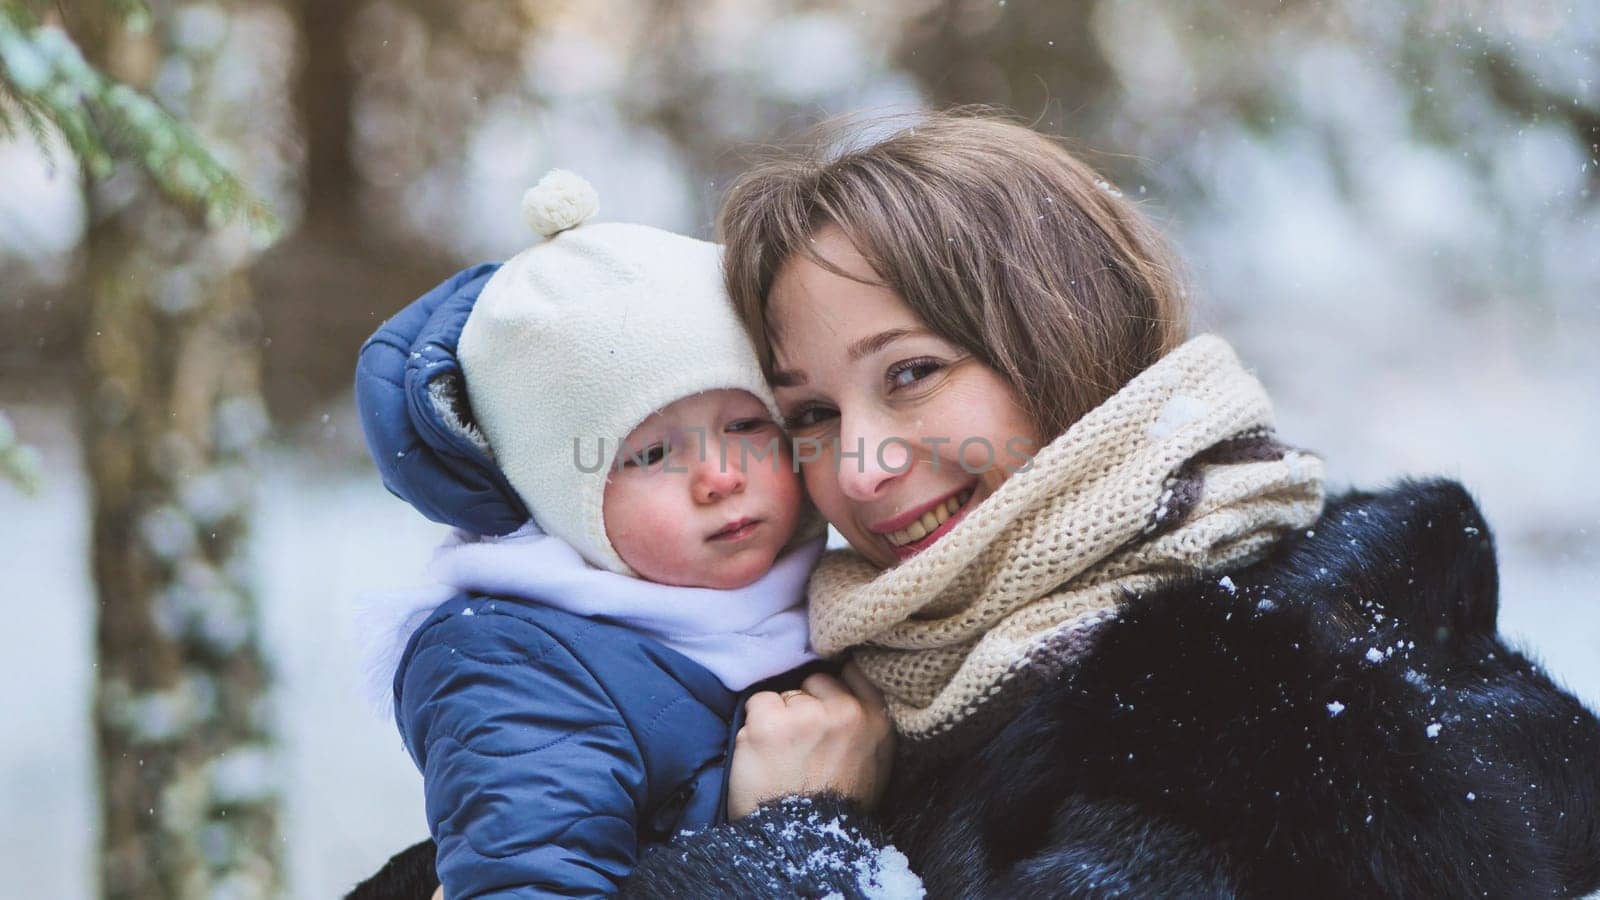 A baby and his mother in the winter woods